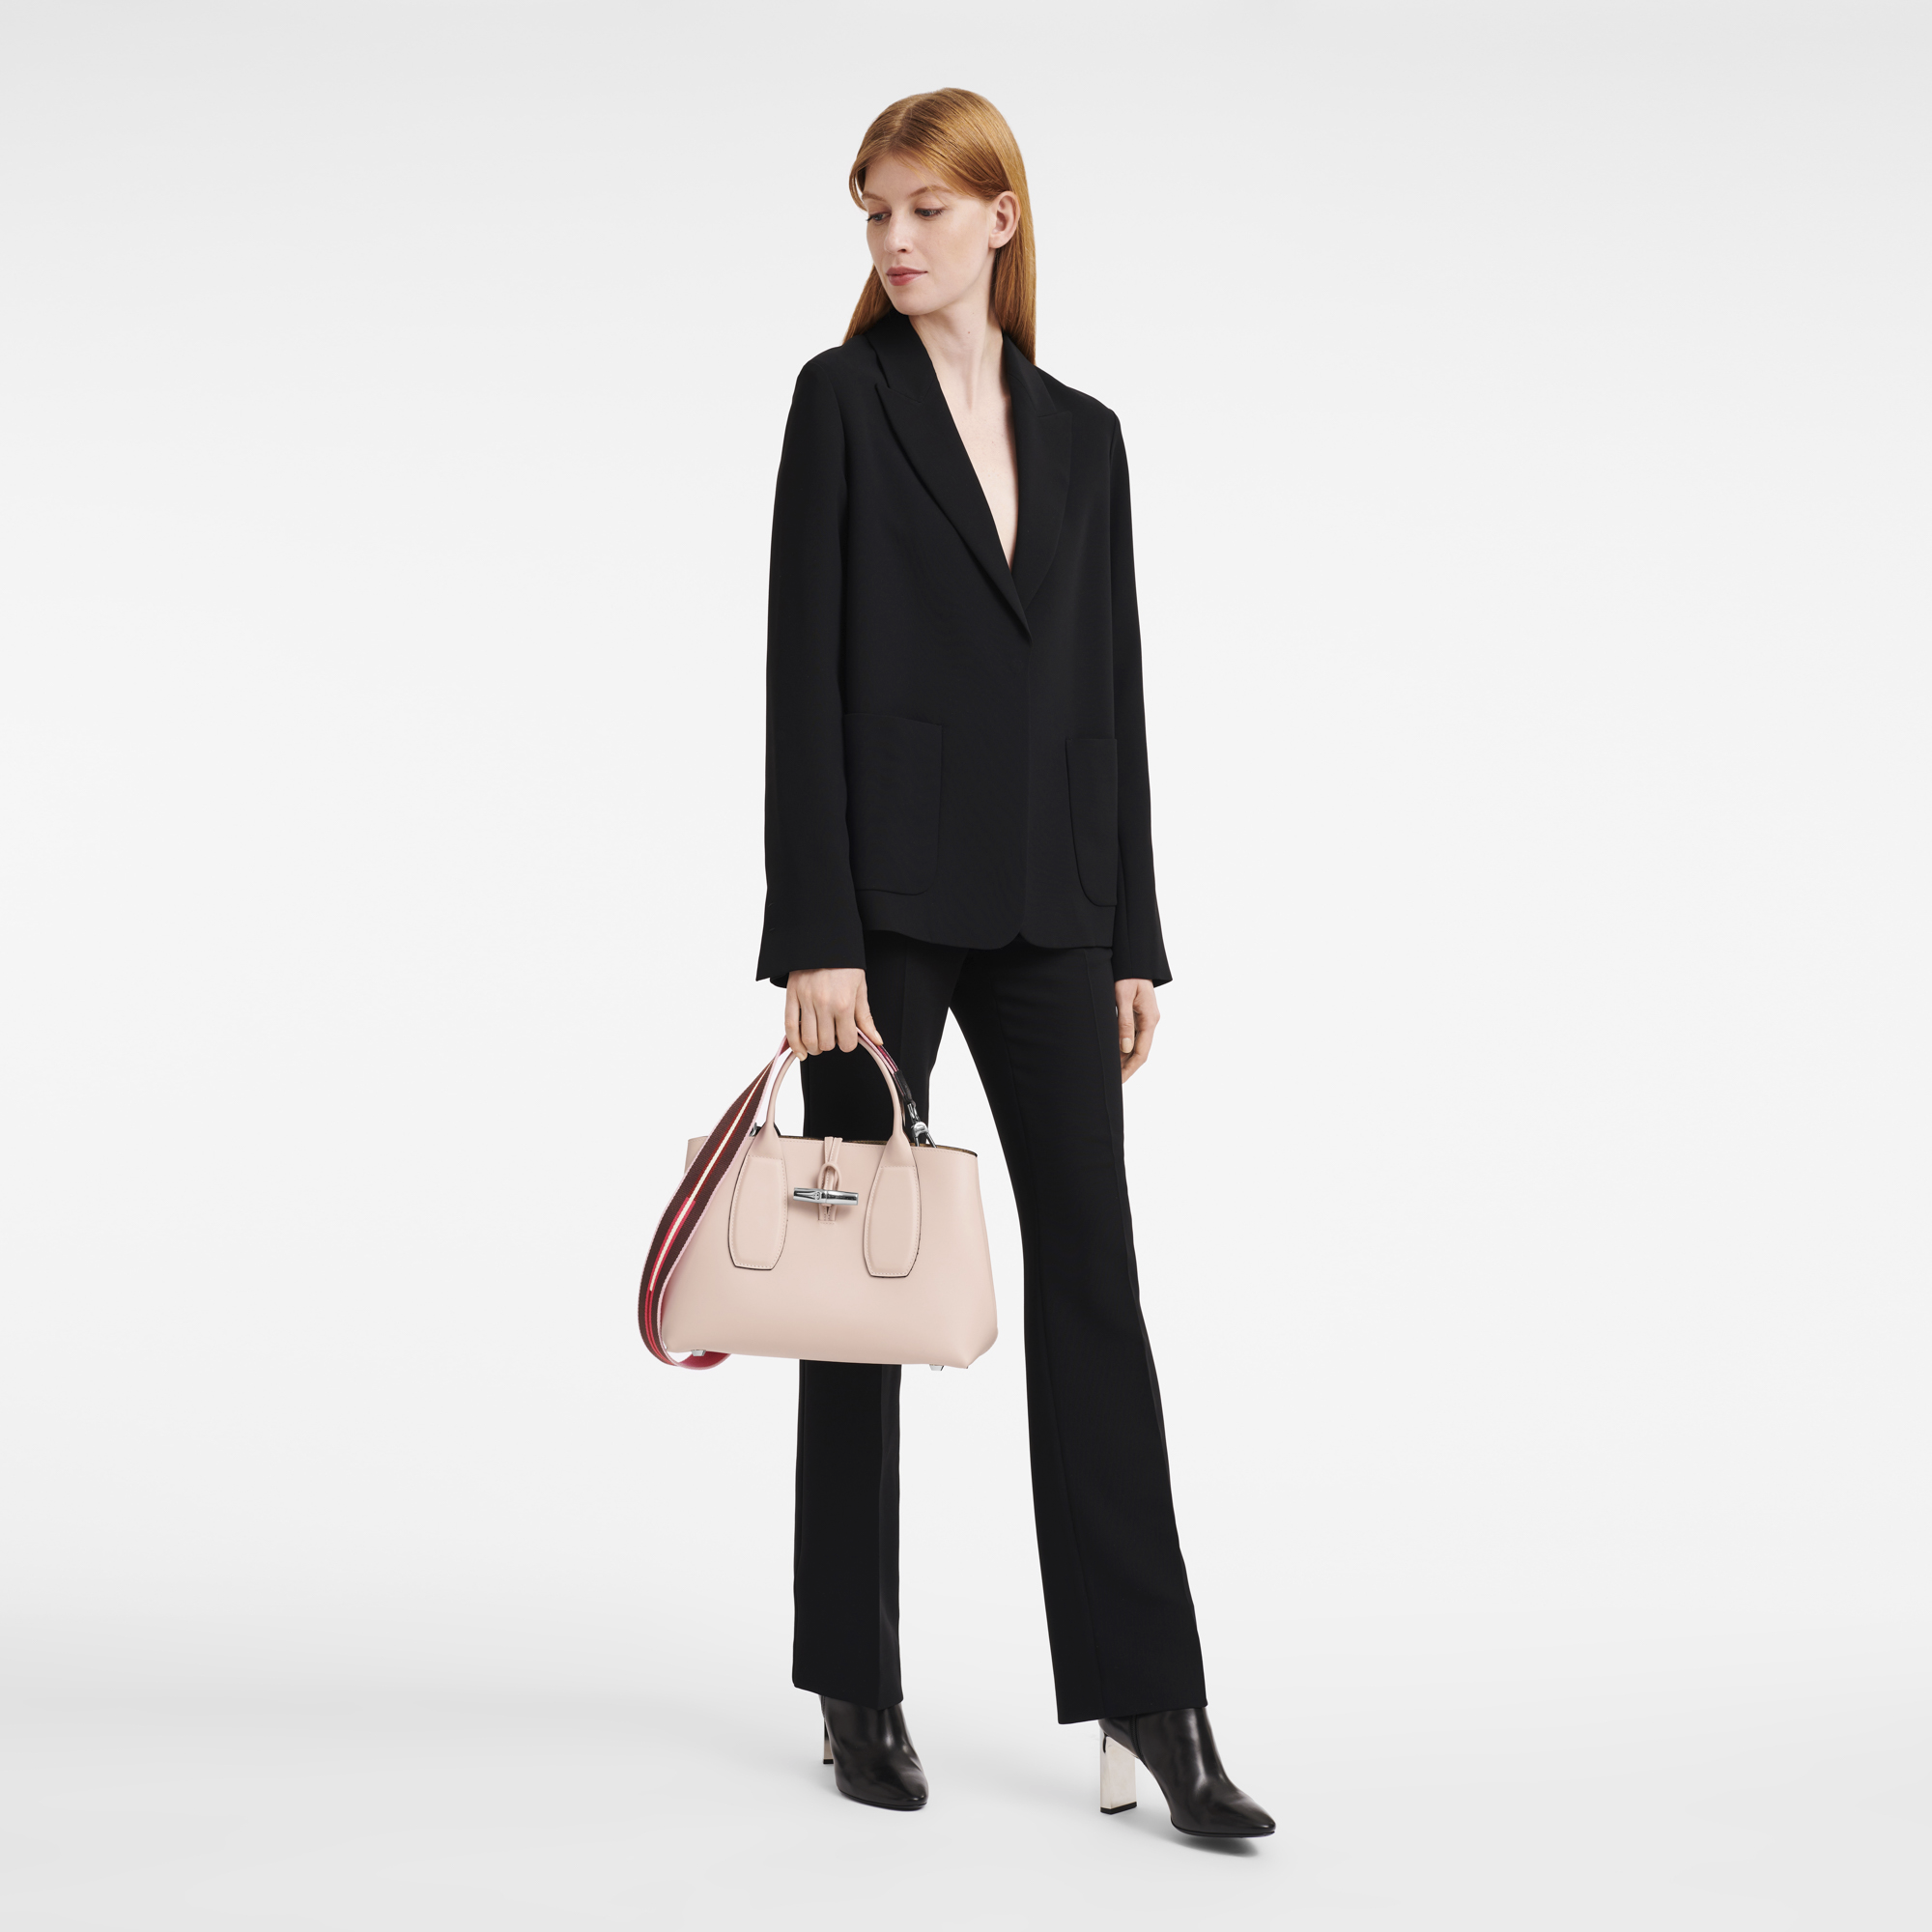 Longchamps autumnwinter 2021 bags are the epitome of Parisian chic